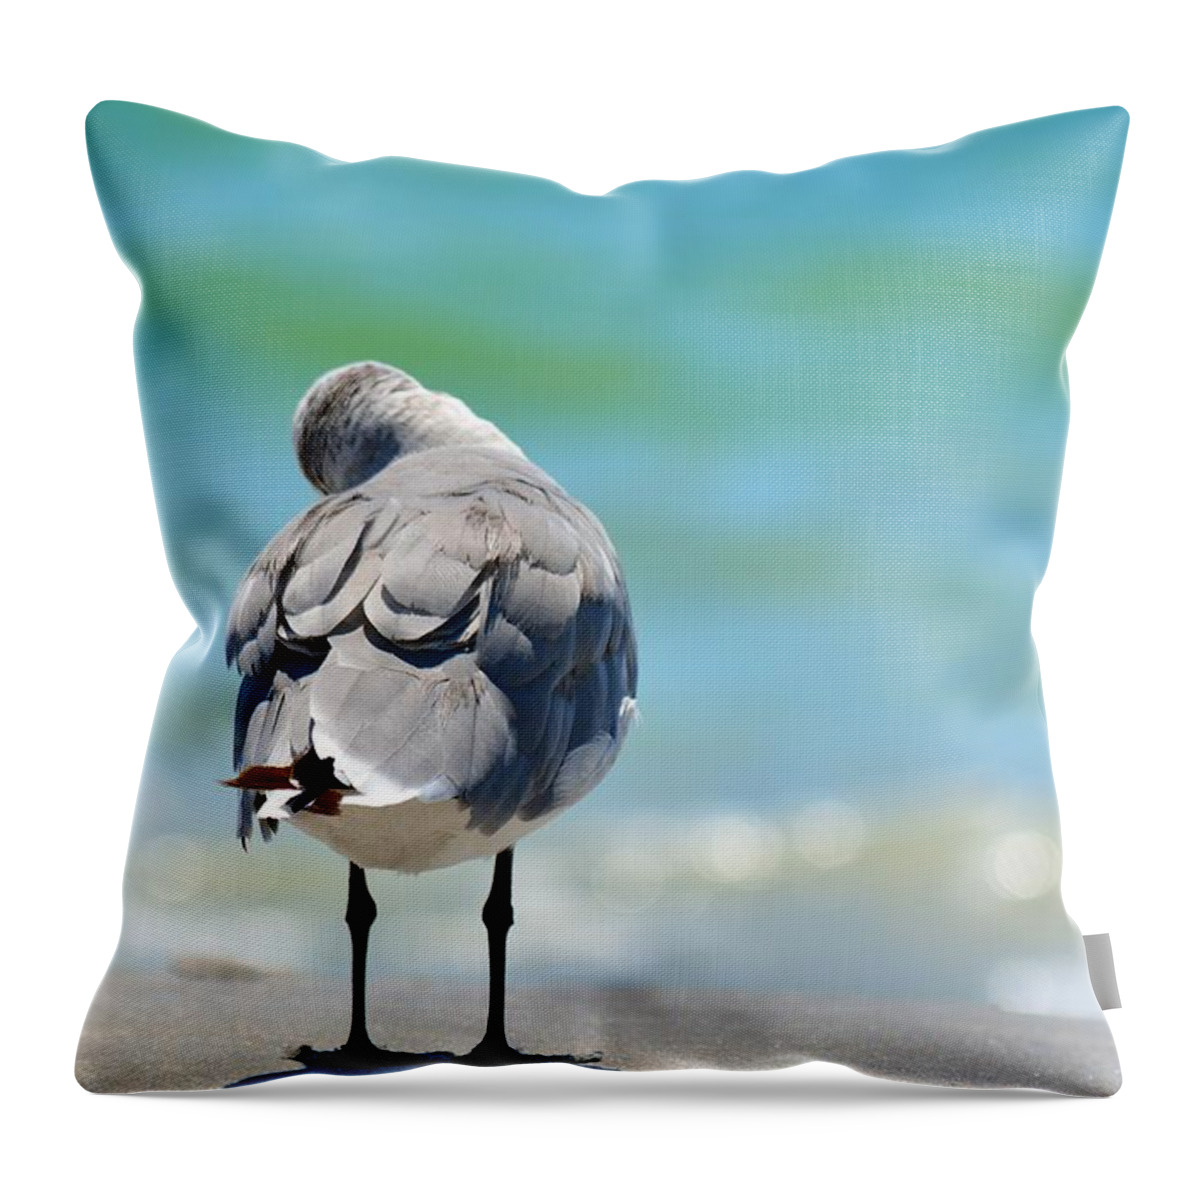 Pigeon Throw Pillow featuring the photograph Another Day Dreamer by Alison Belsan Horton